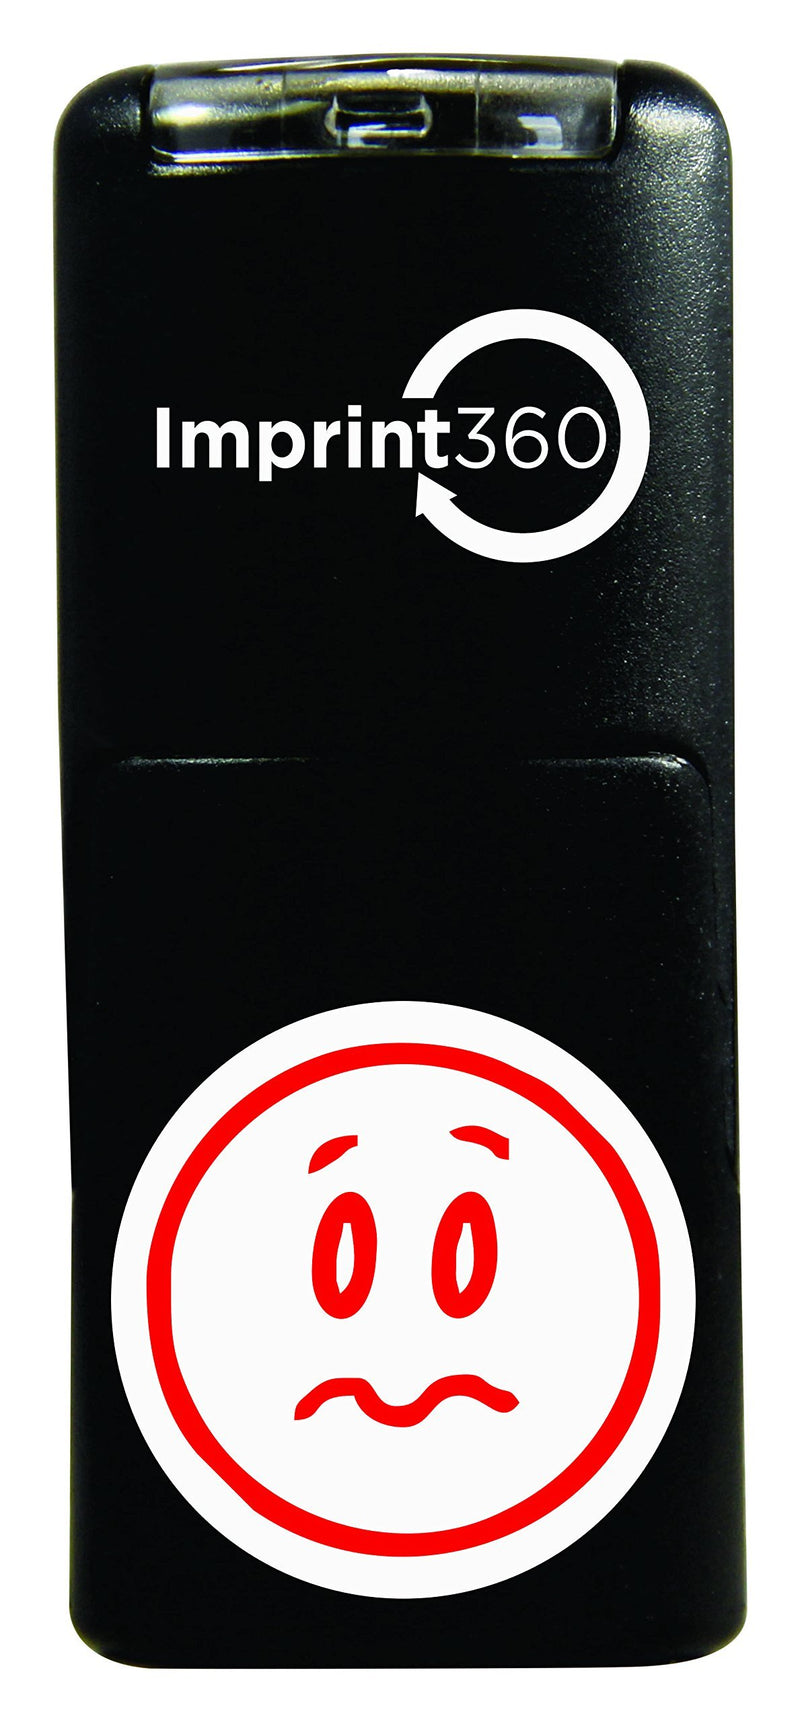 Supply360 AS-IMP2014 Round Teacher Stamp - Frowning Frown Smily Face, Red Ink, Durable, Light Weight Self-Inking Stamp, 5/8" Impression Area